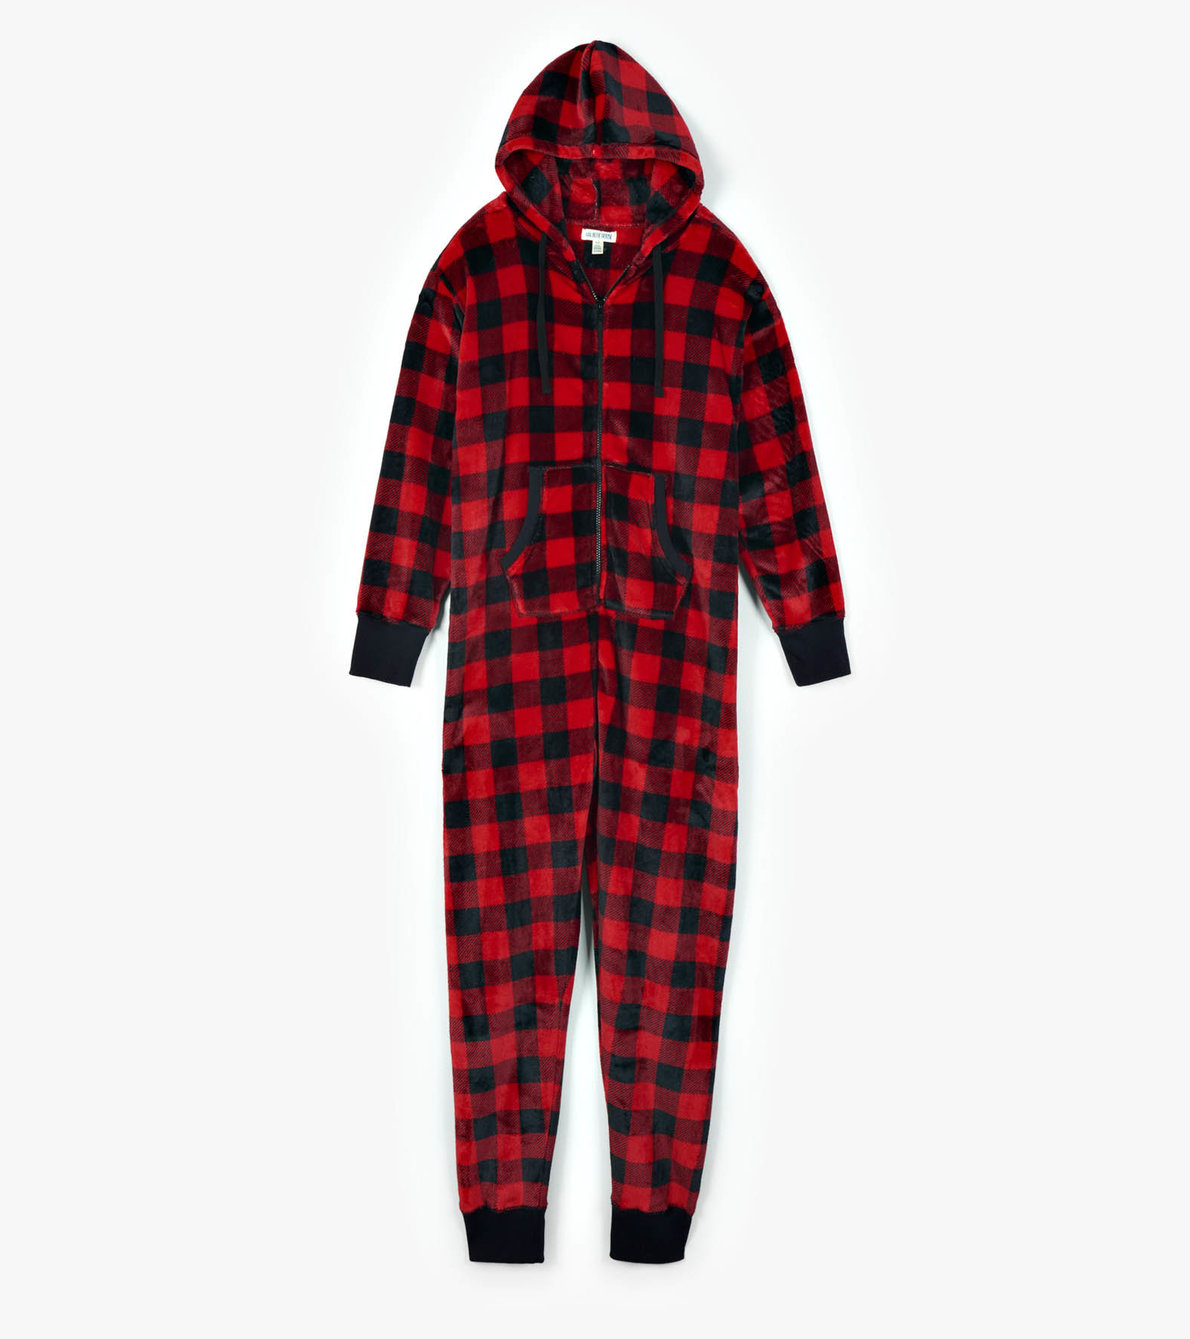 View larger image of Adult Buffalo Plaid Hooded Fleece Jumpsuit